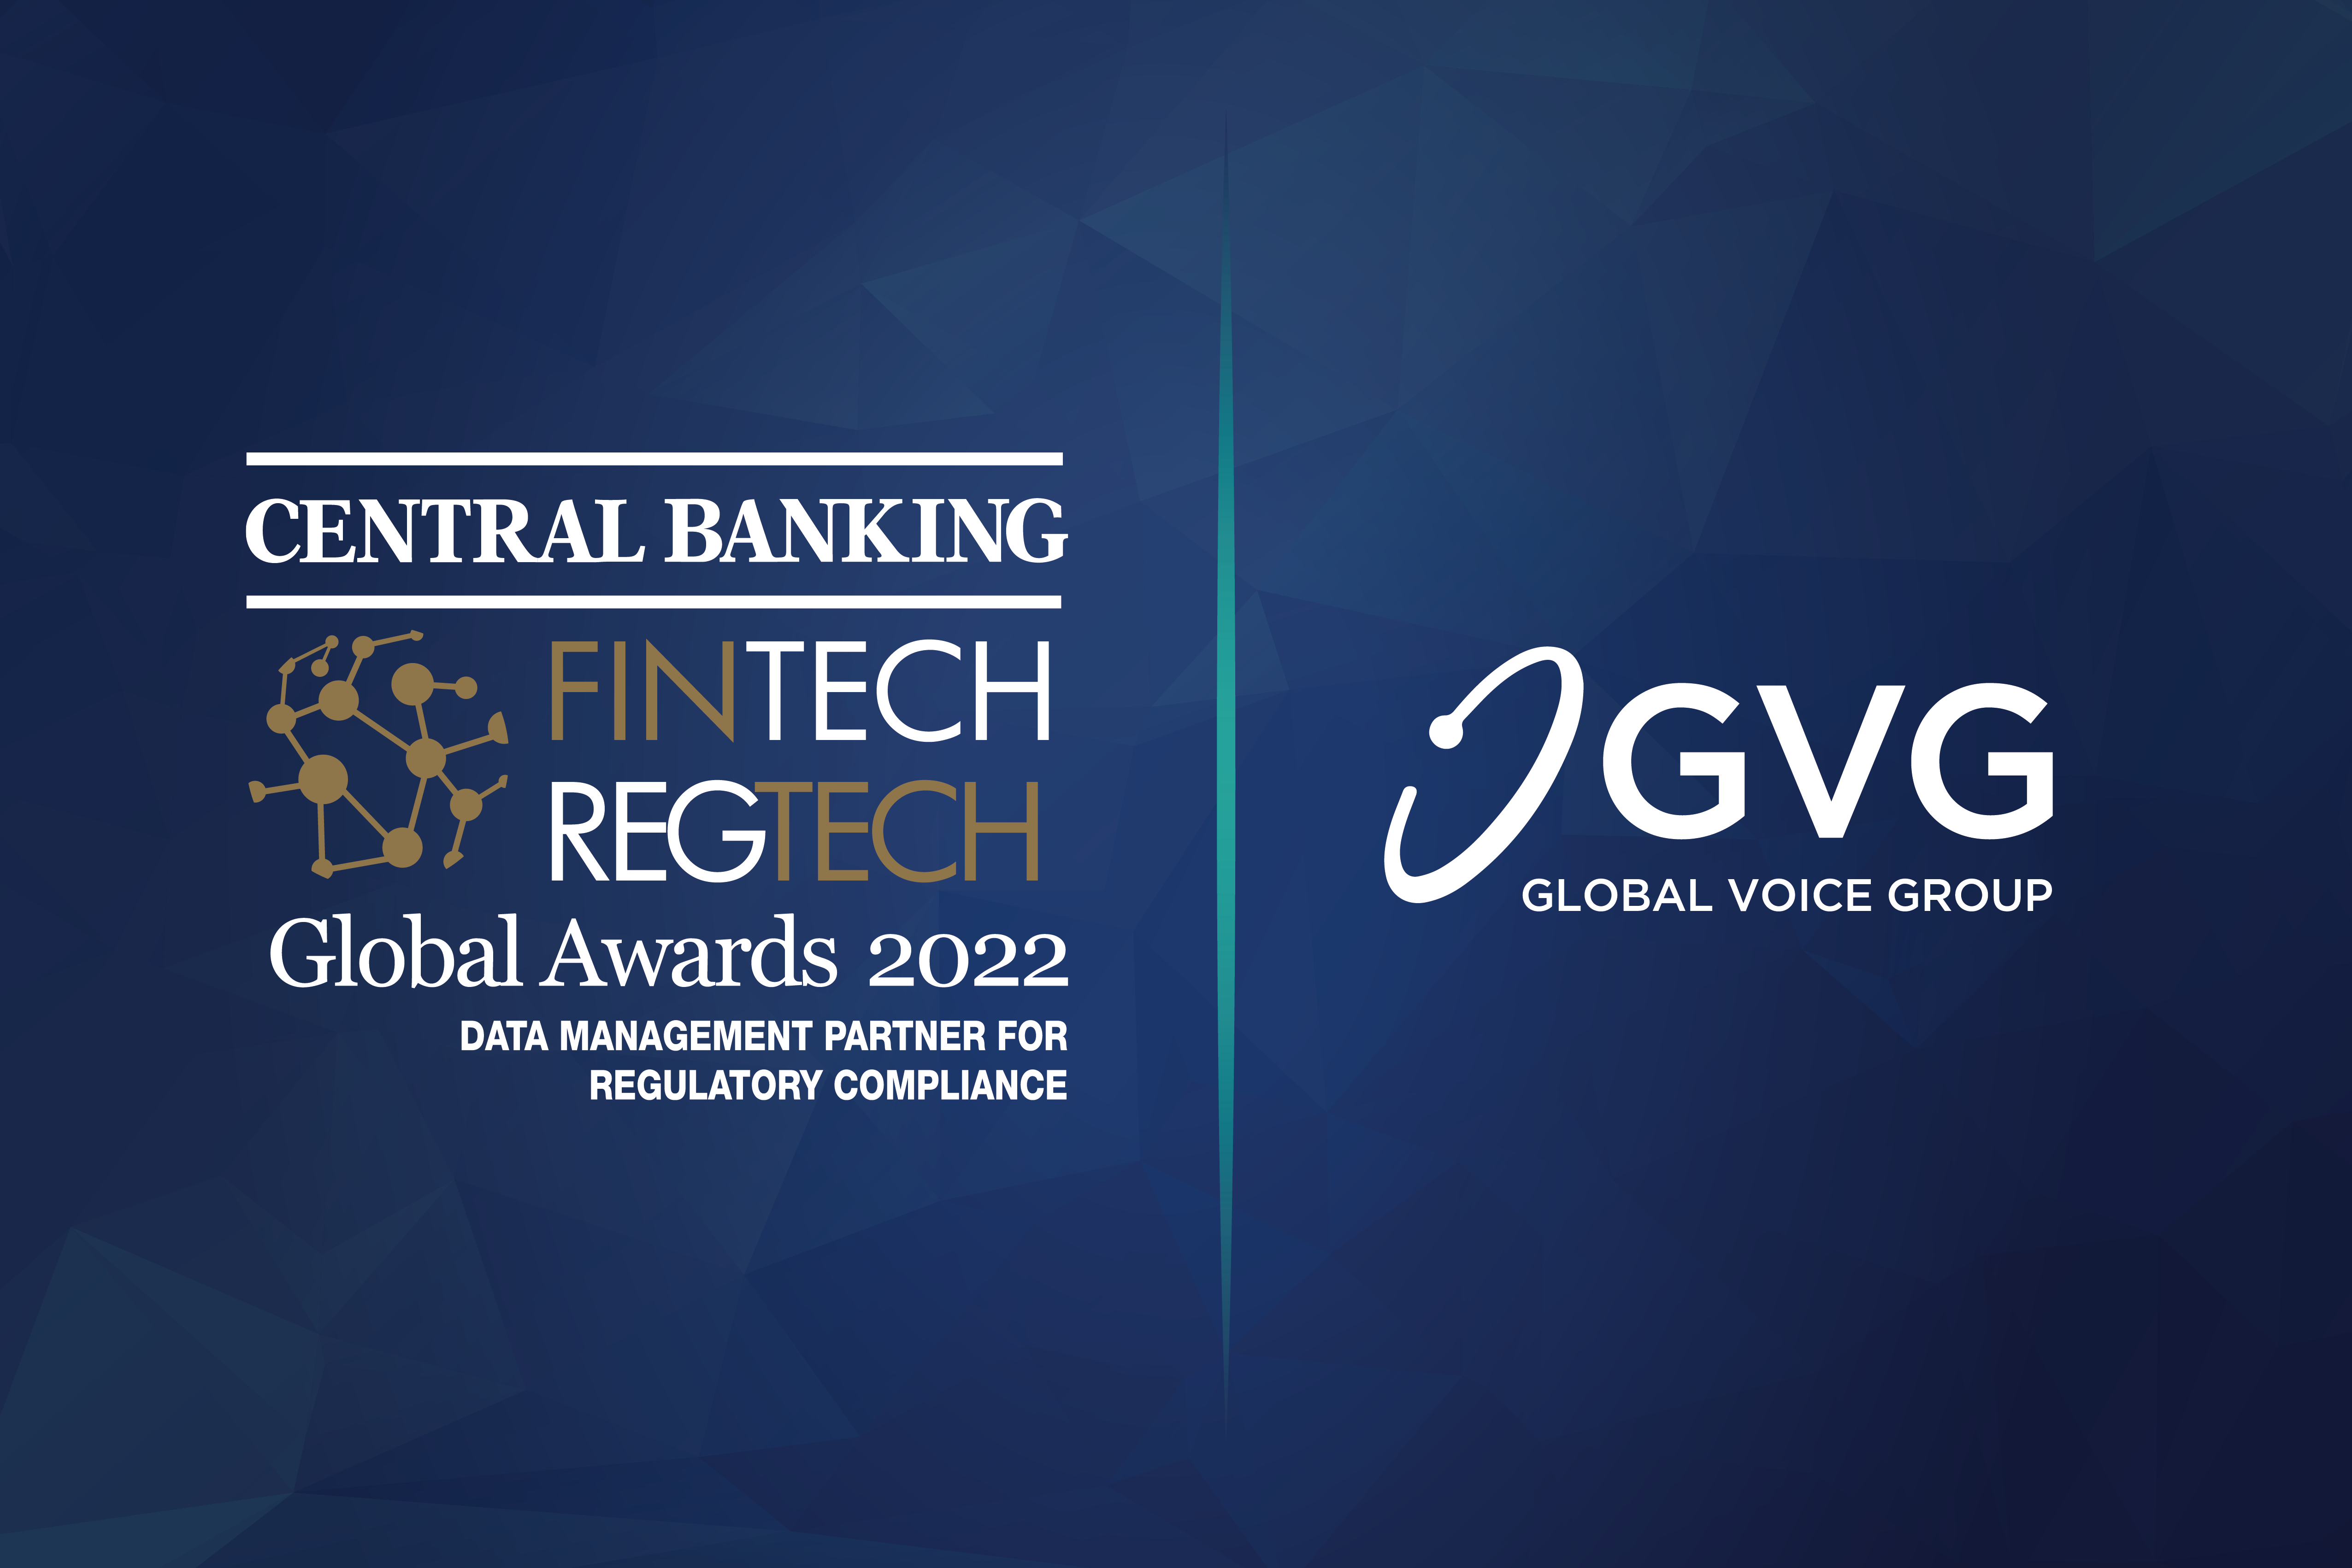 GVG’s M3 solution a winner in Central Banking’s Fintech & Regtech Global Awards 2022